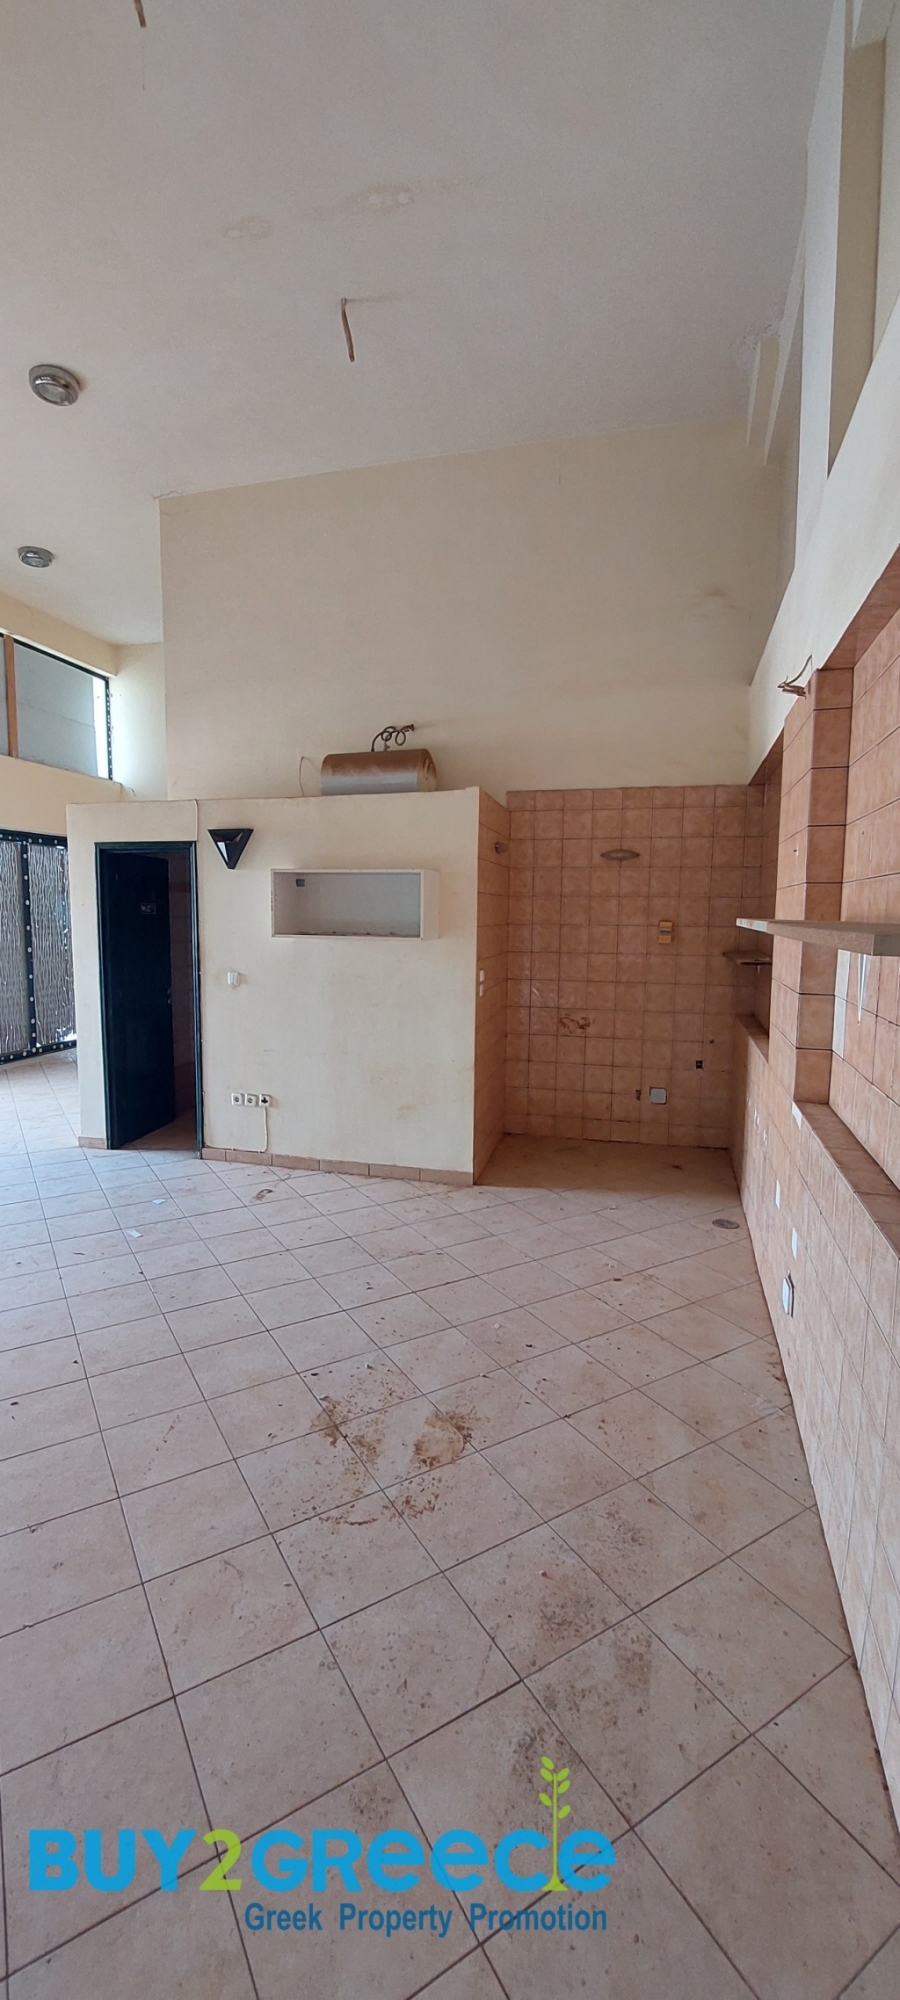 (For Rent) Commercial Commercial Property || Athens West/Kamatero - 75 Sq.m, 550€ ||| ID :1602887-3